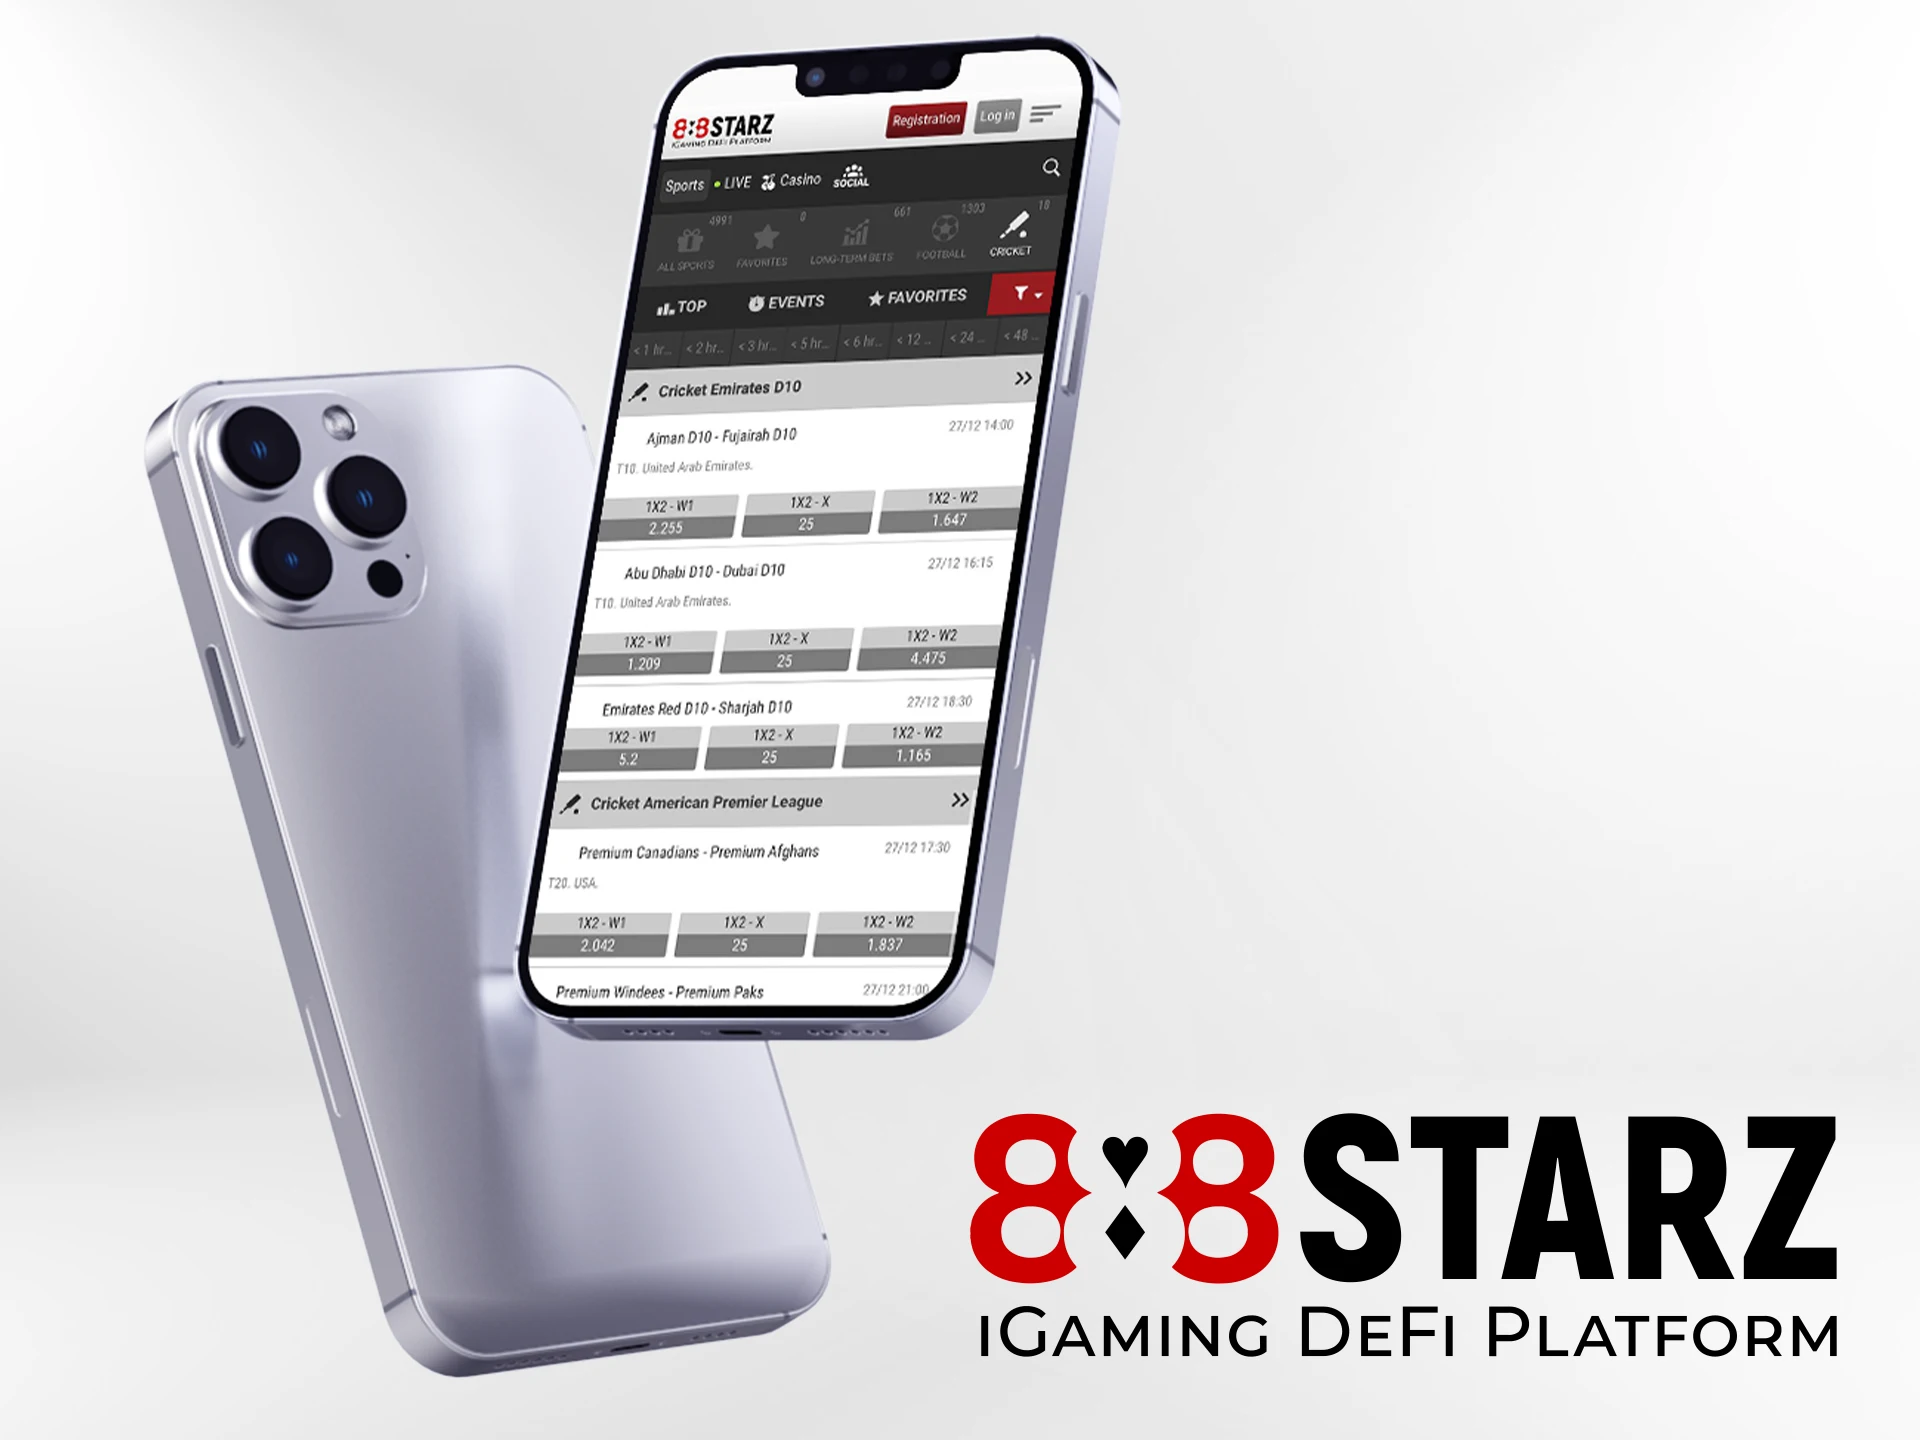 The 888Starz app allows players to bet and play casino games.